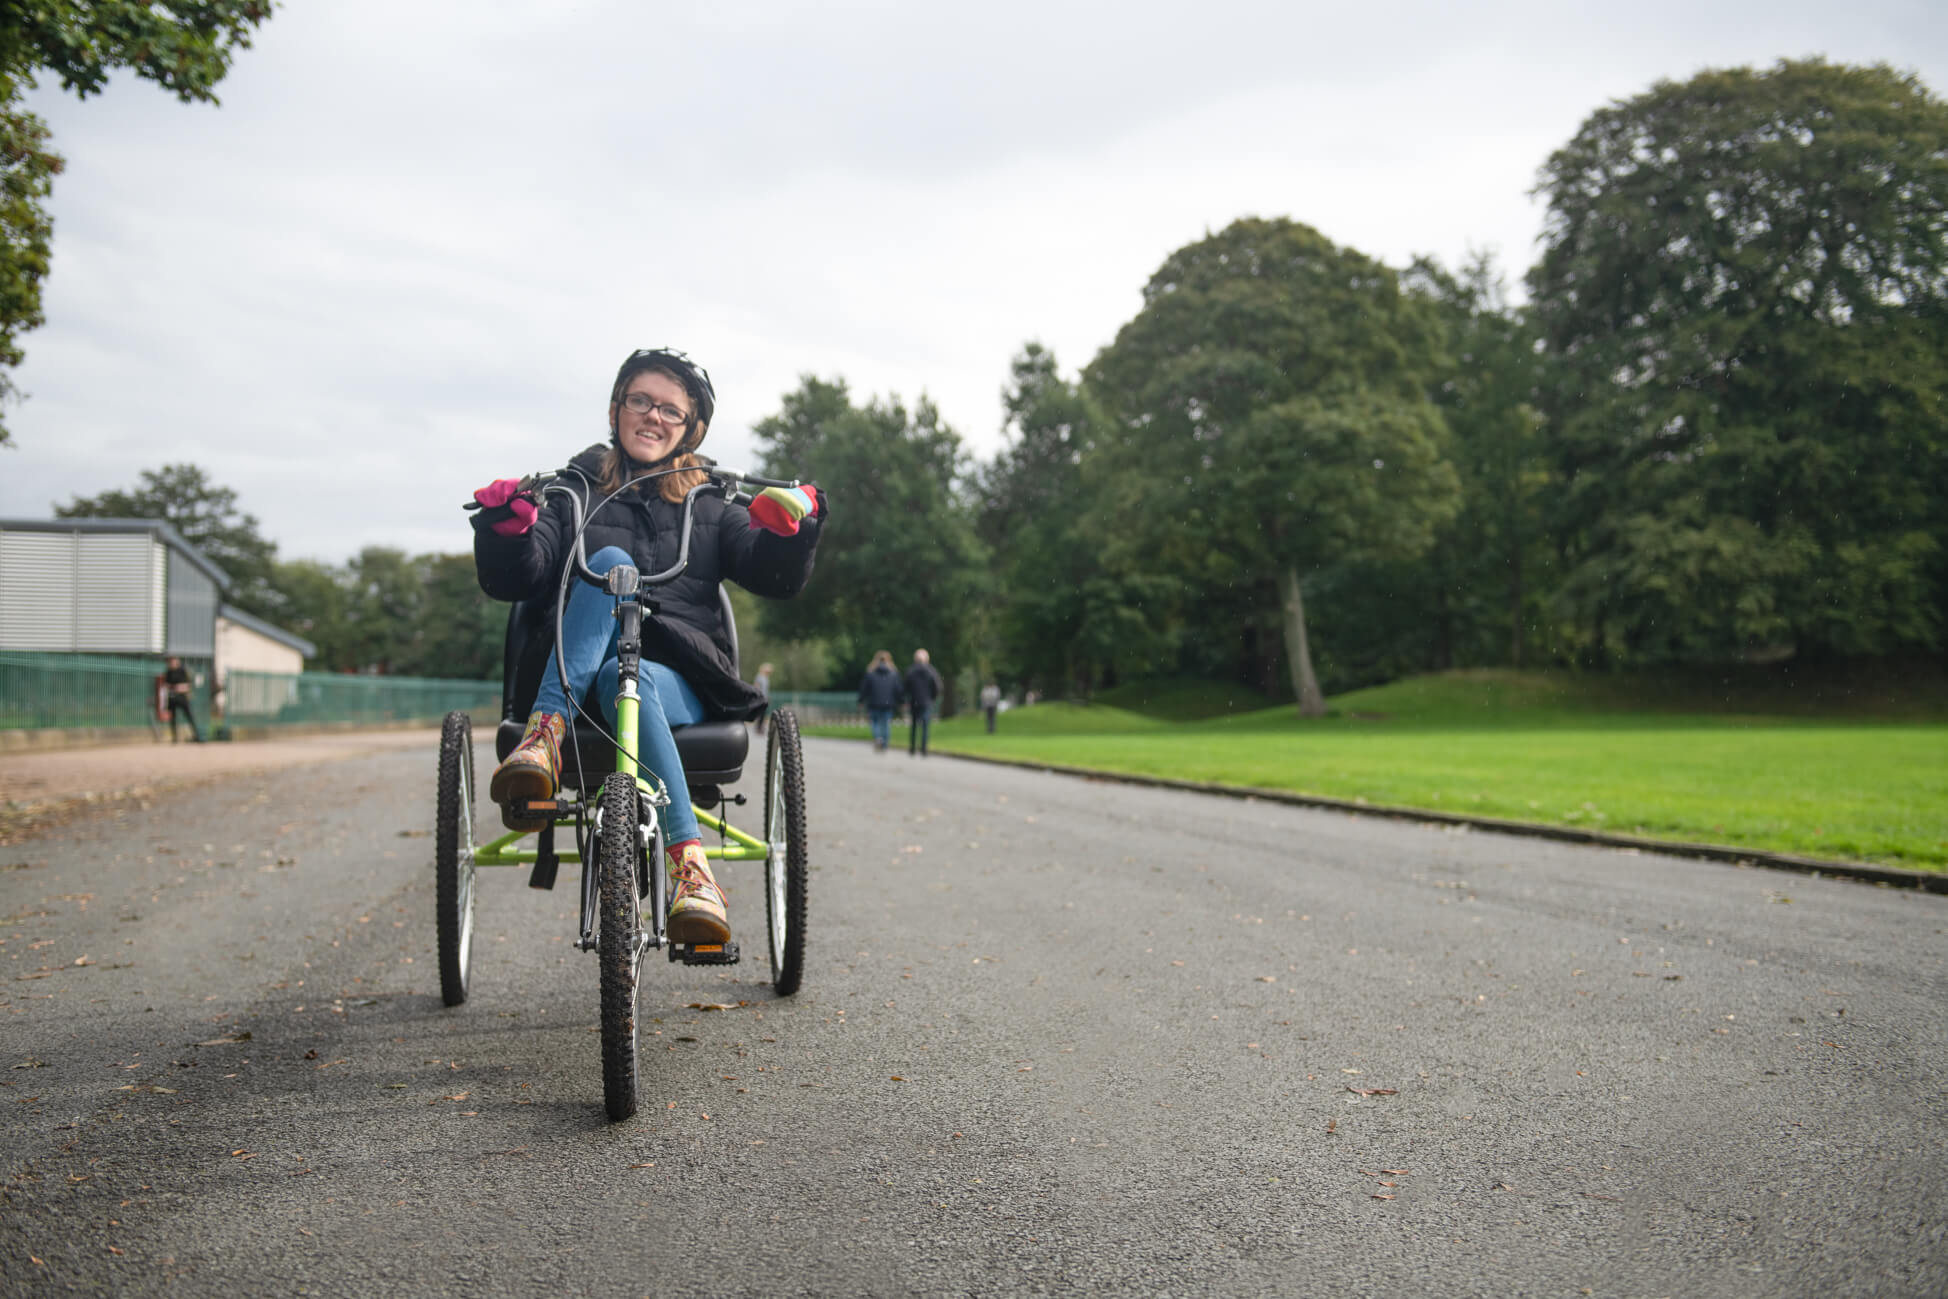 A young woman cycling on a specially adapted cycle in Birkenhead Park